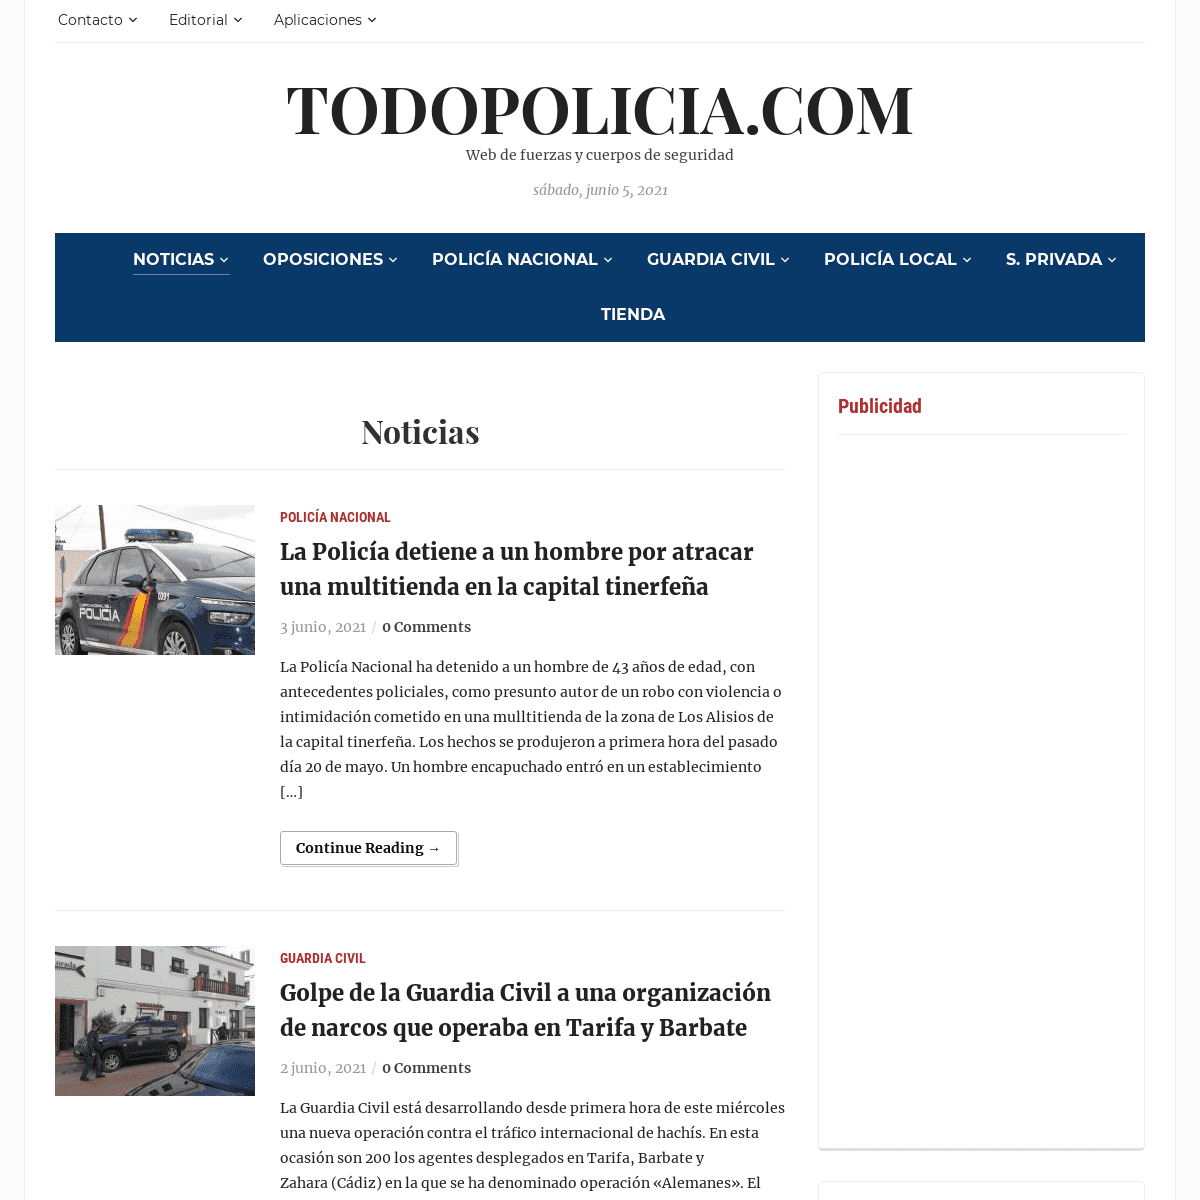 A complete backup of https://todopolicia.com